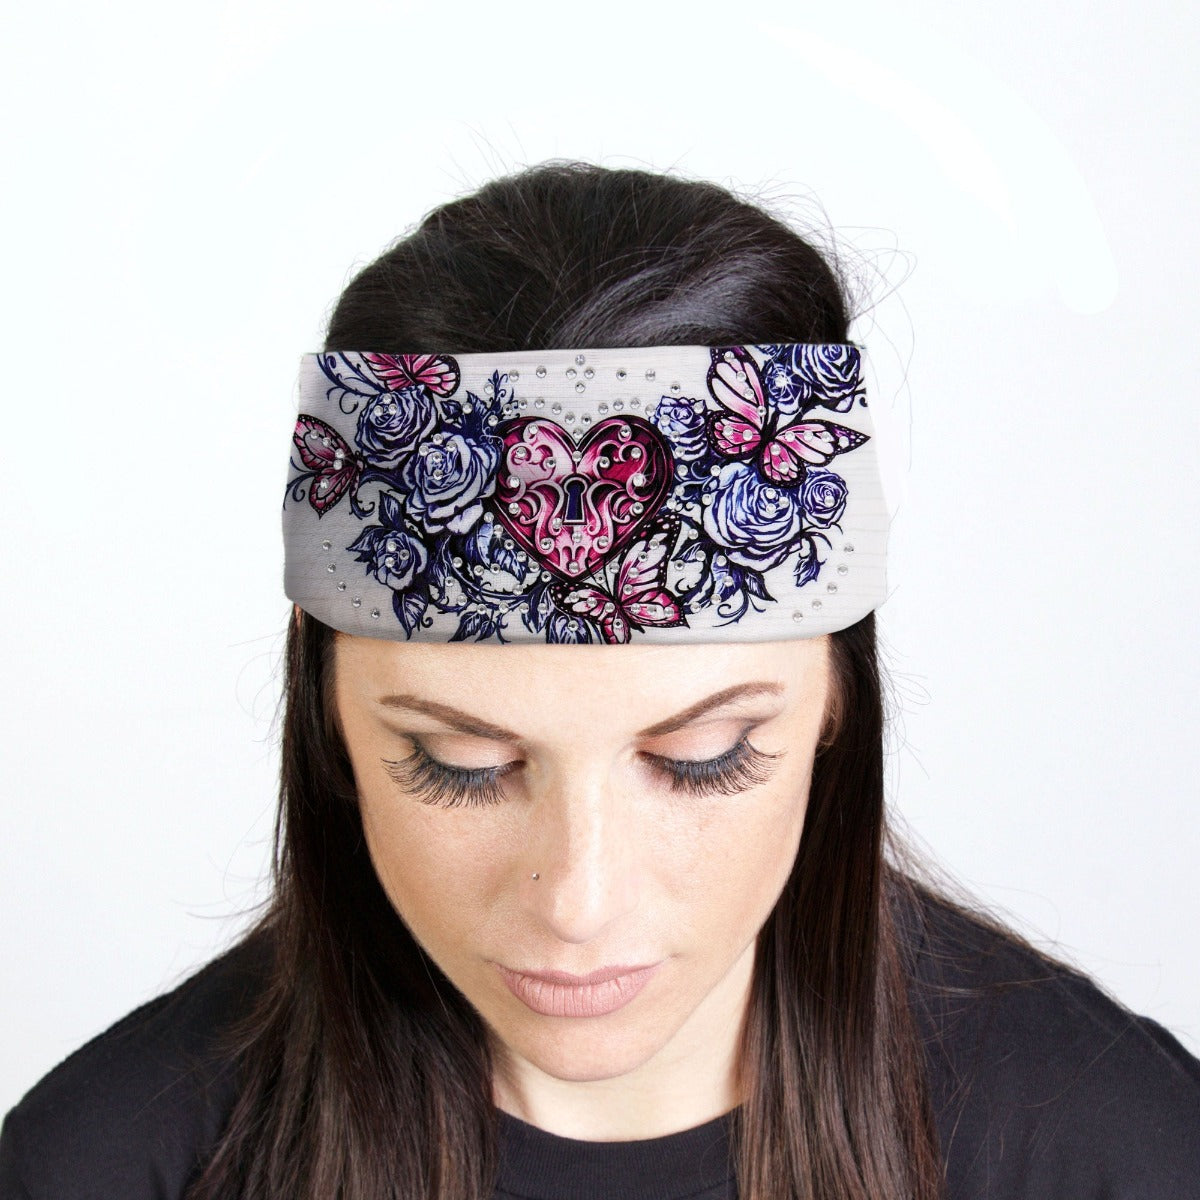 A woman adding sparkle to her biker style outfit with a Hot Leathers Heart Lock Bandana Headband Wraps w/Rhinestones, White featuring a flower design.